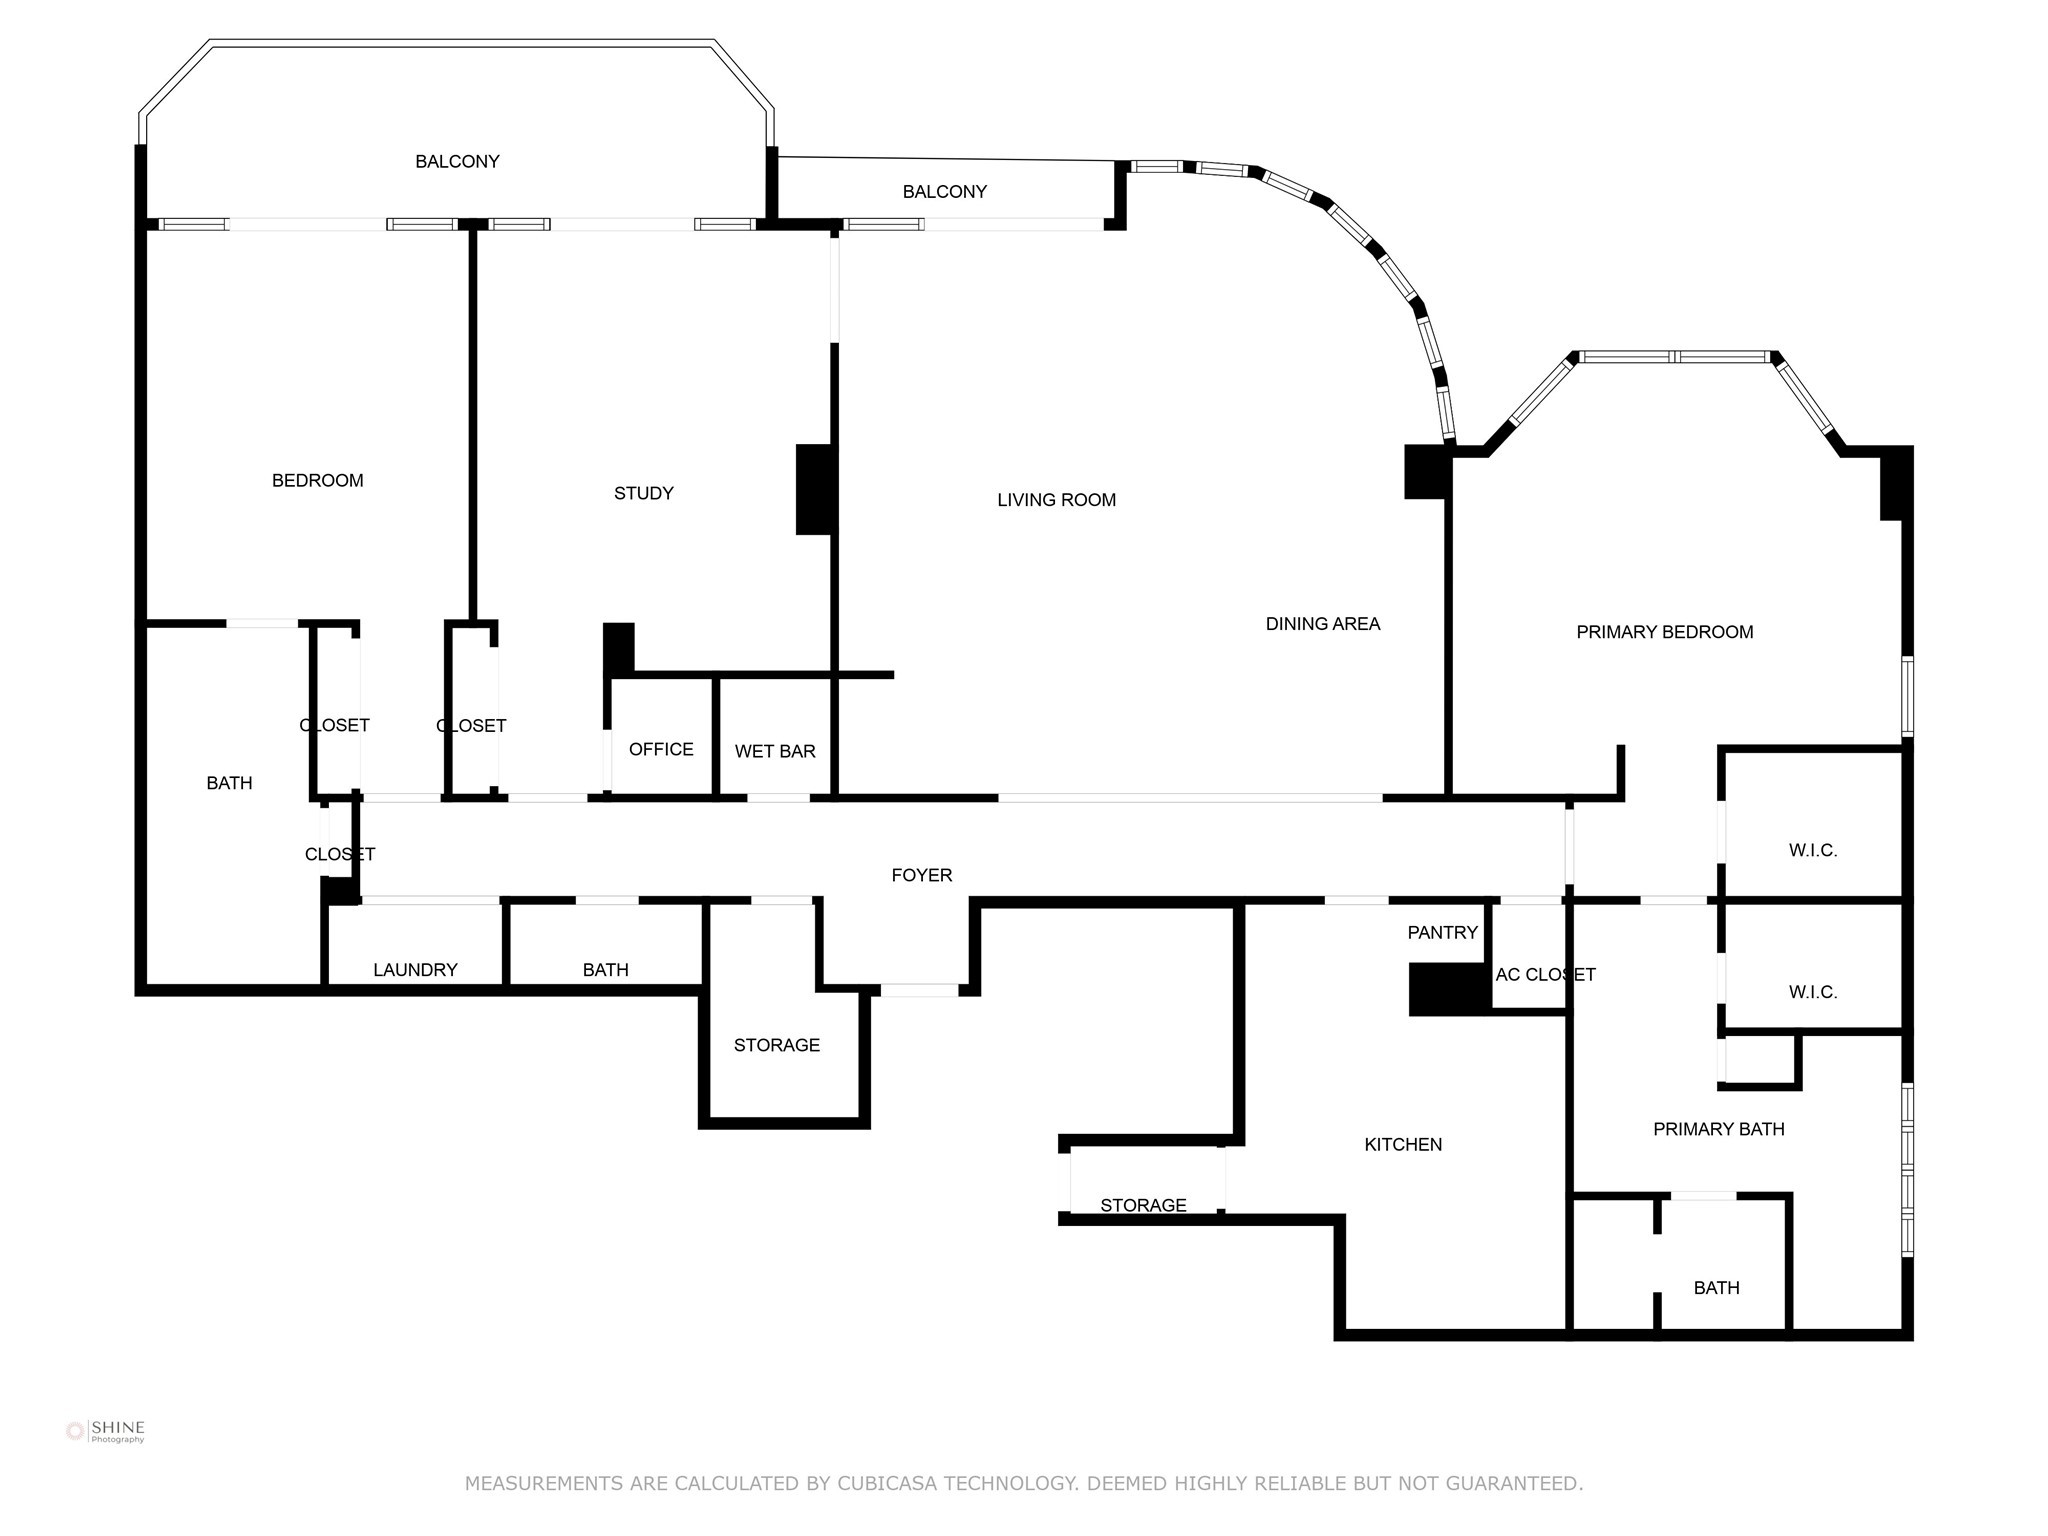 Floor Plan of unit 7E in The Tealstone.